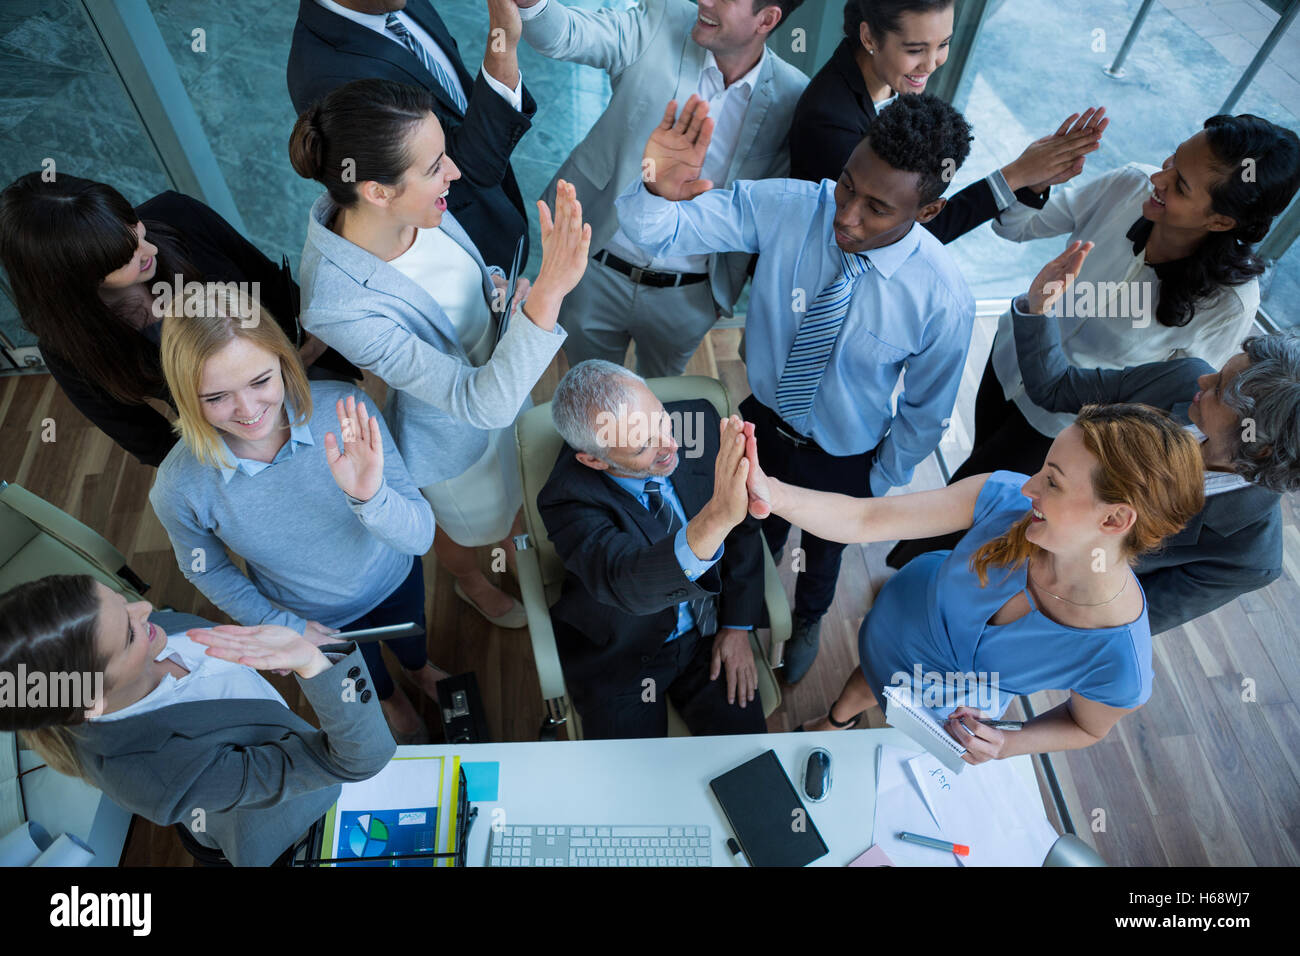 Businesspeople giving high five to each other Stock Photo